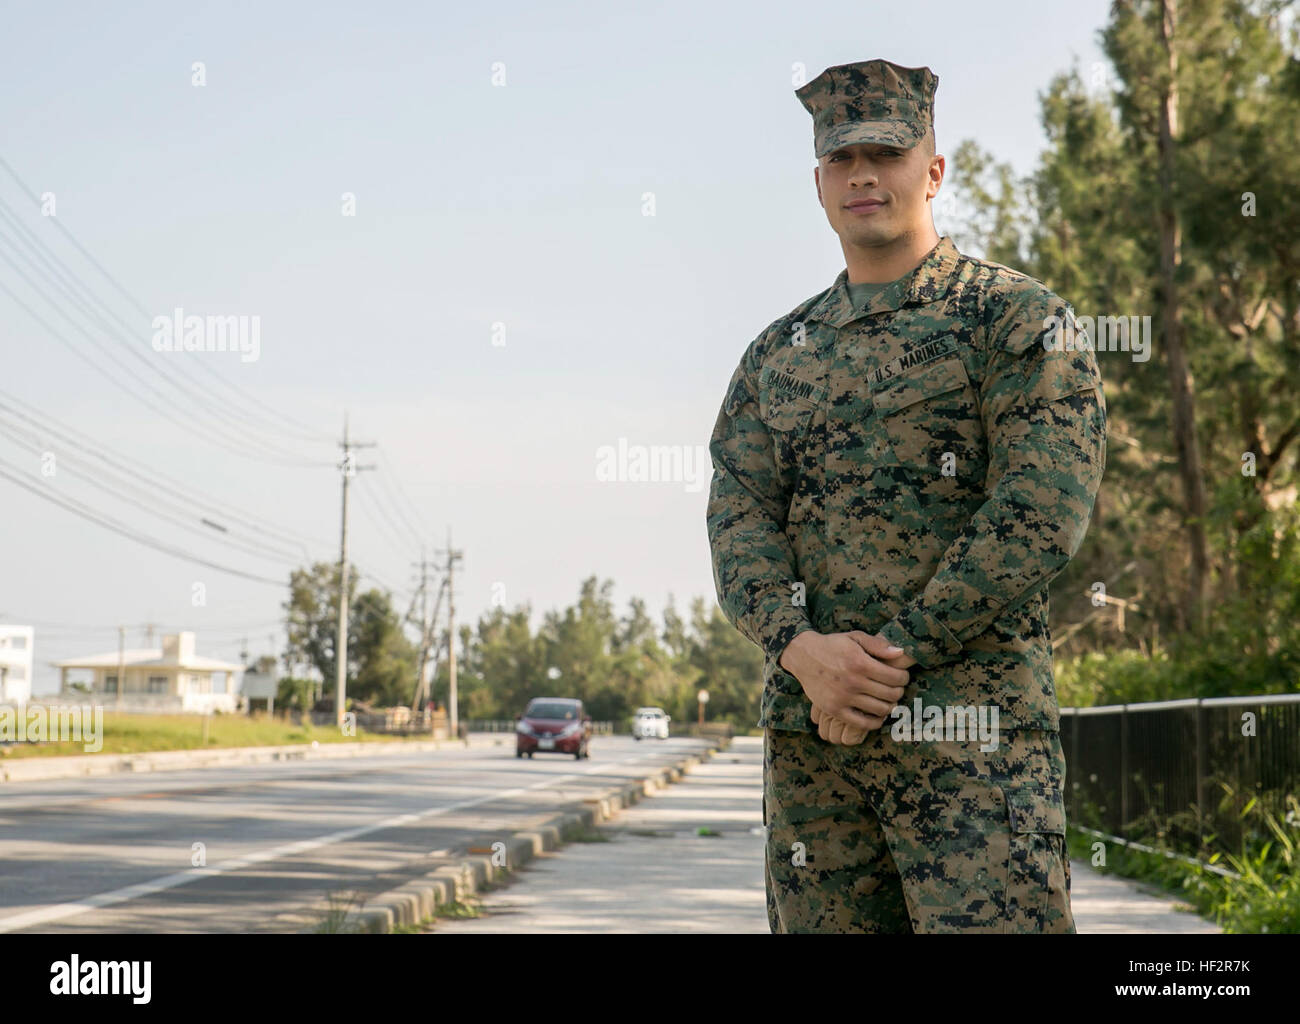 Sgt. Jacob Baumann poses for a photo near the scene where he saved a local elderly man after he fell off of his bicycle onto the road. Baumann moved the local and his bike to the side and began several chest compressions that saved his life. “It was more reaction from my training and just what Marines do, said Baumann. “It was more on the lines of, ‘what can I do to help?’ That’s what we’re here for as Marines; we’re here to help.” Baumann is a fire support man with Headquarters Battery, 12th Marine Regiment, 3rd Marine Division, III Marine Expeditionary Force. (U.S. Marine photo by Cpl. Rebec Stock Photo